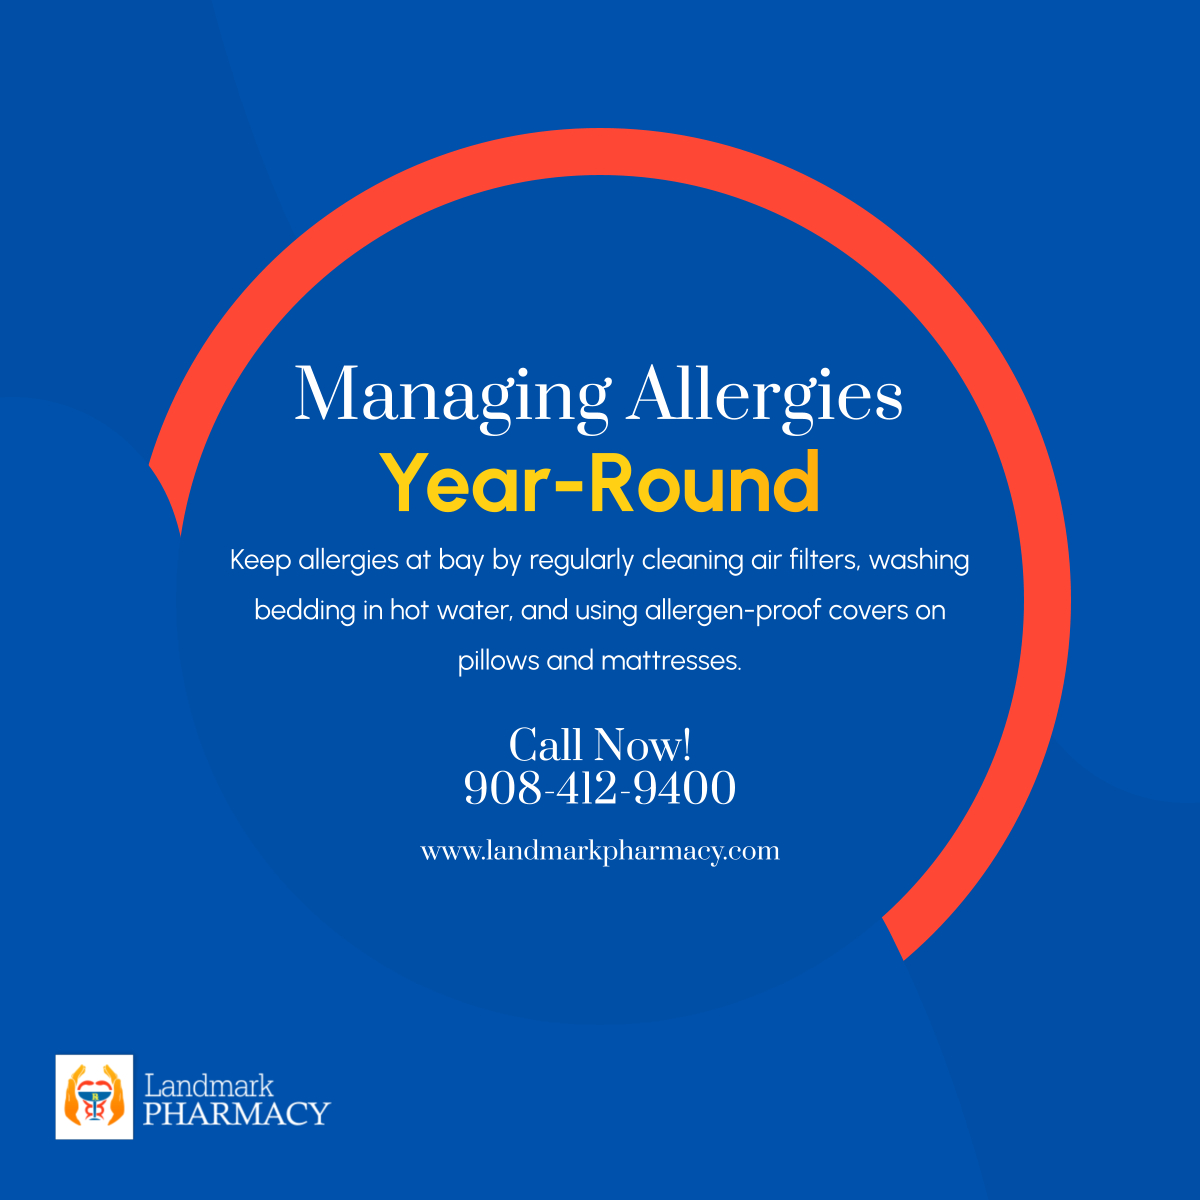 Don't let allergies disrupt your life. Follow these simple tips to minimize allergens and breathe easier all year long. 

#NorthPlainfieldNJ #RetailPharmacy #AllergyTips